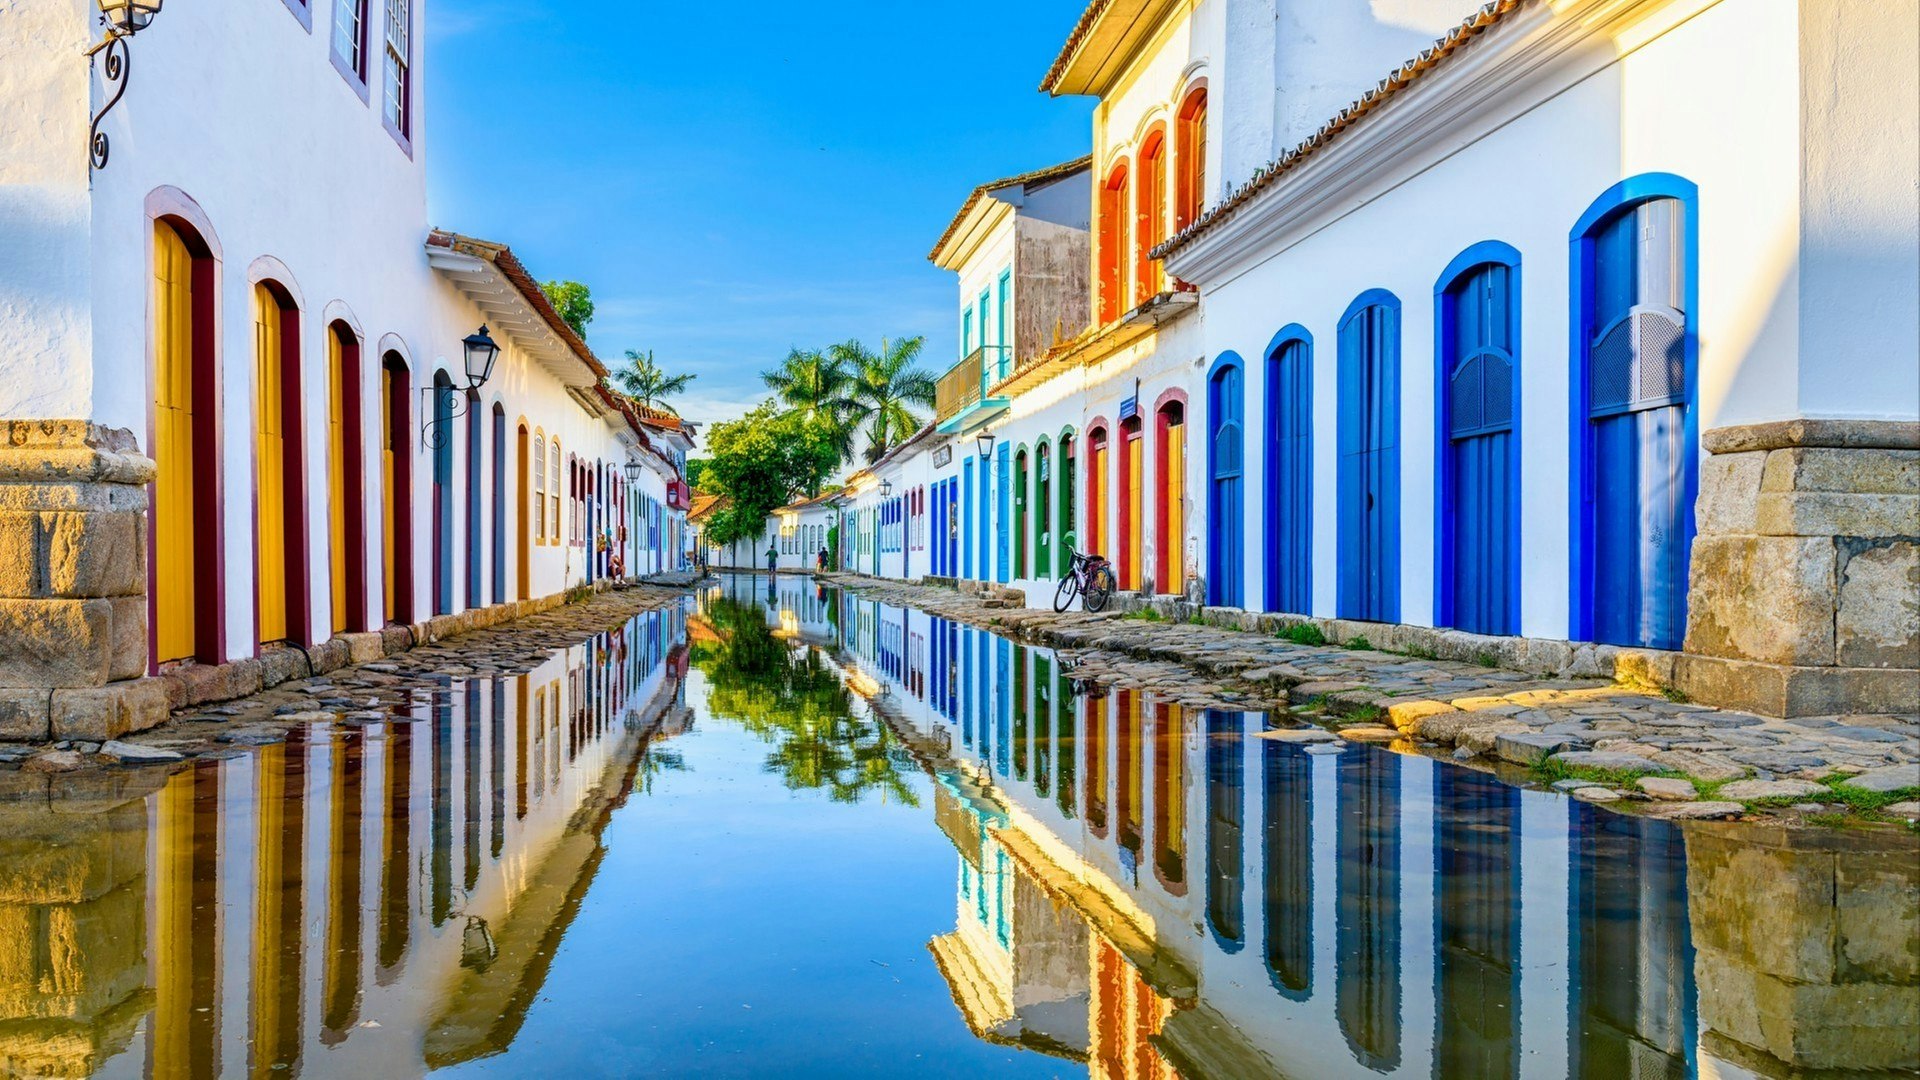 Paraty is a preserved Portuguese colonial and Brazilian Imperial municipality